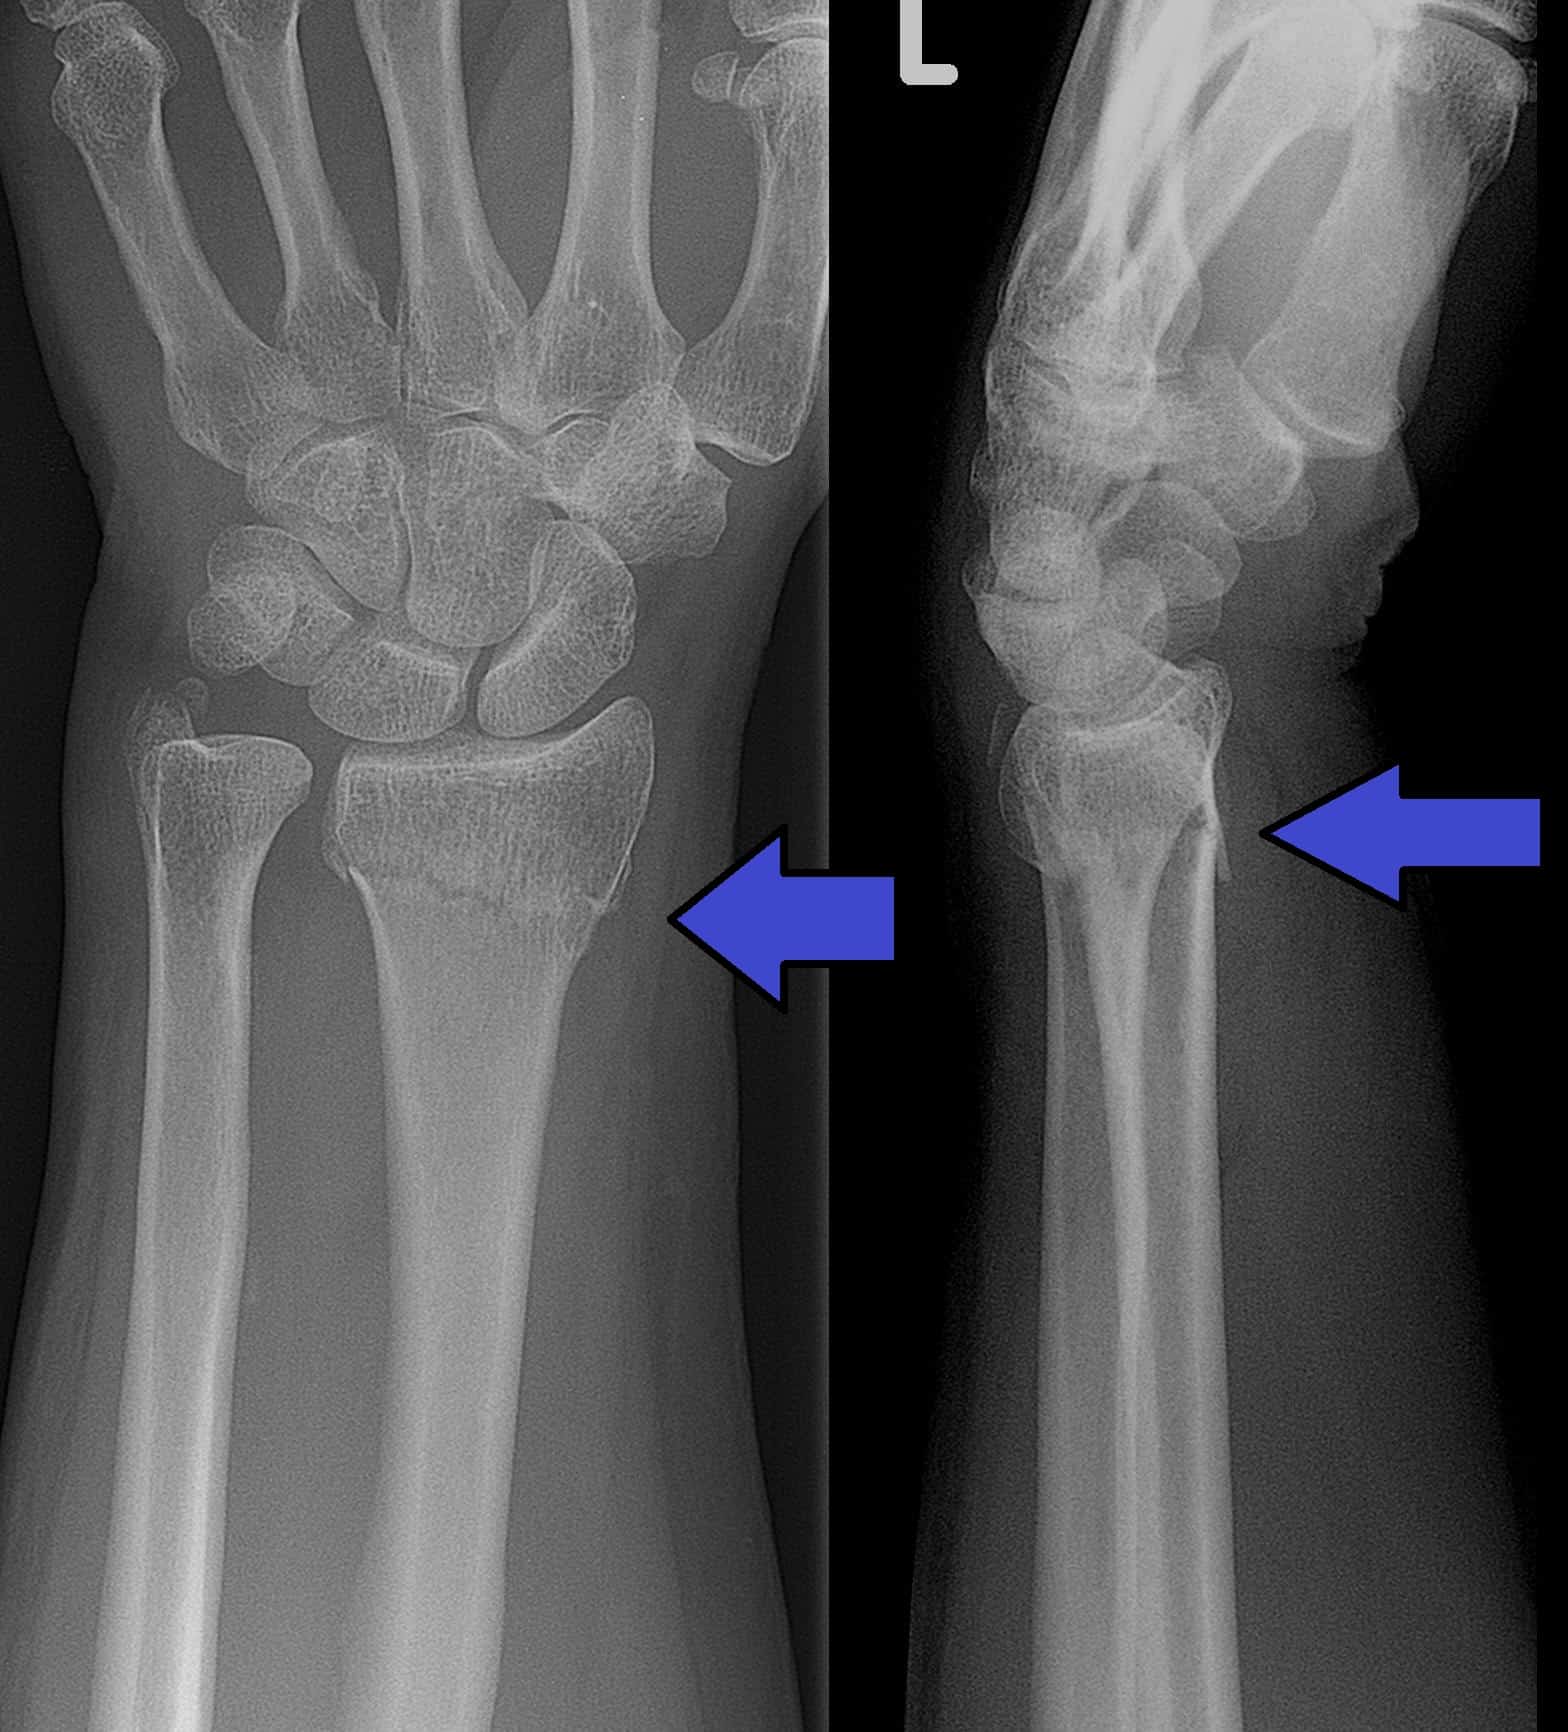 Colles fracture X-ray